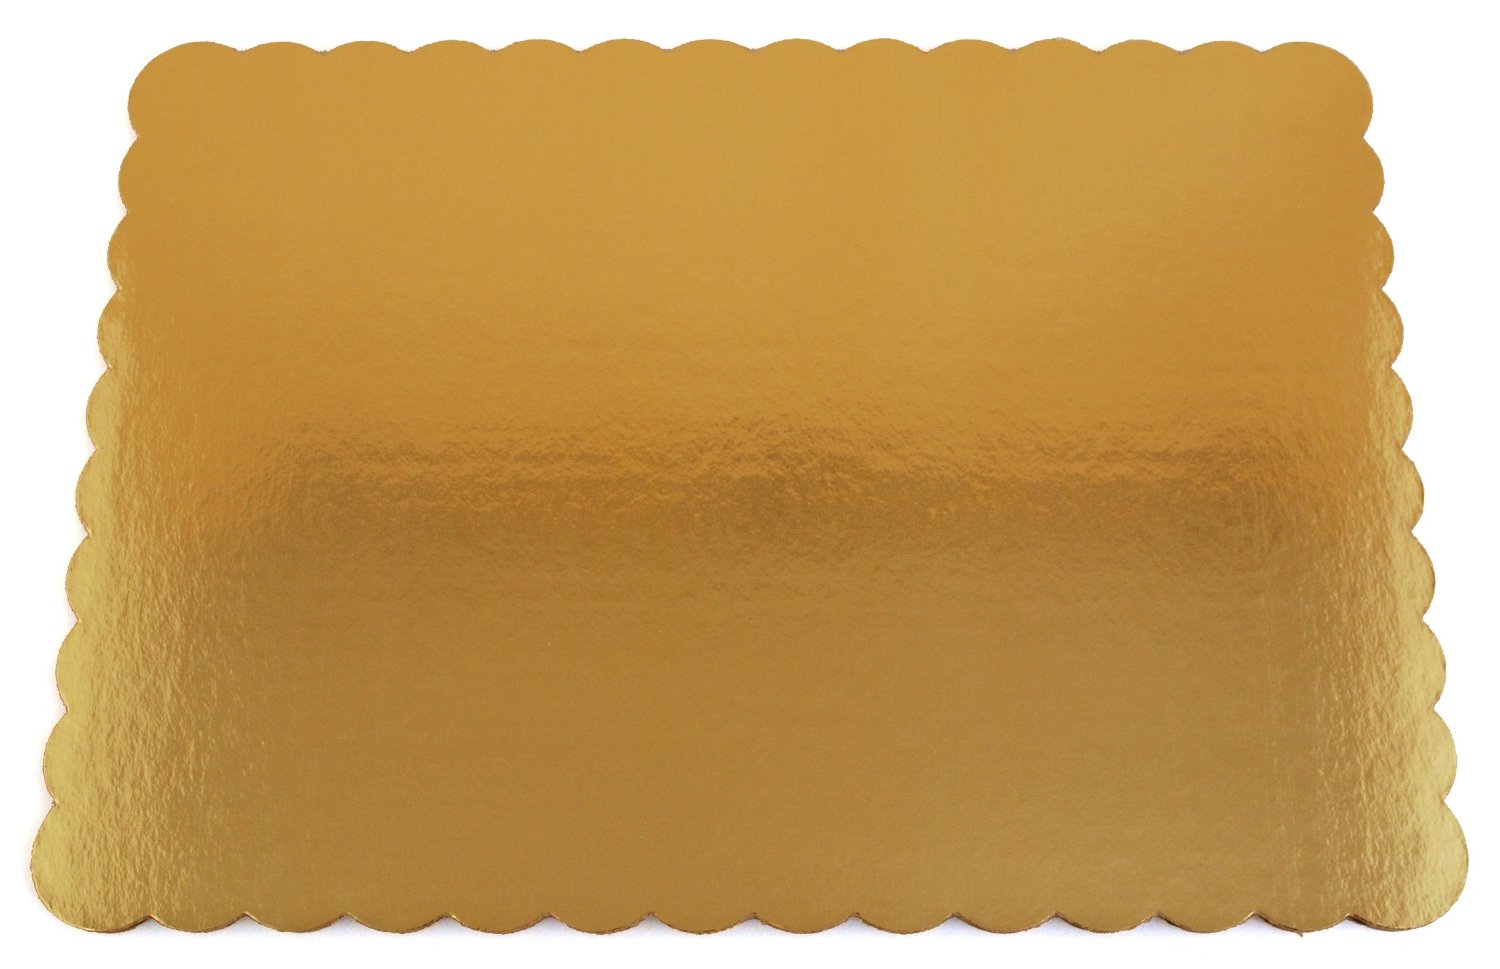 1660 Gold 14&quot;x10&quot; 1/4 Sheet
Double Wall Pads - 50